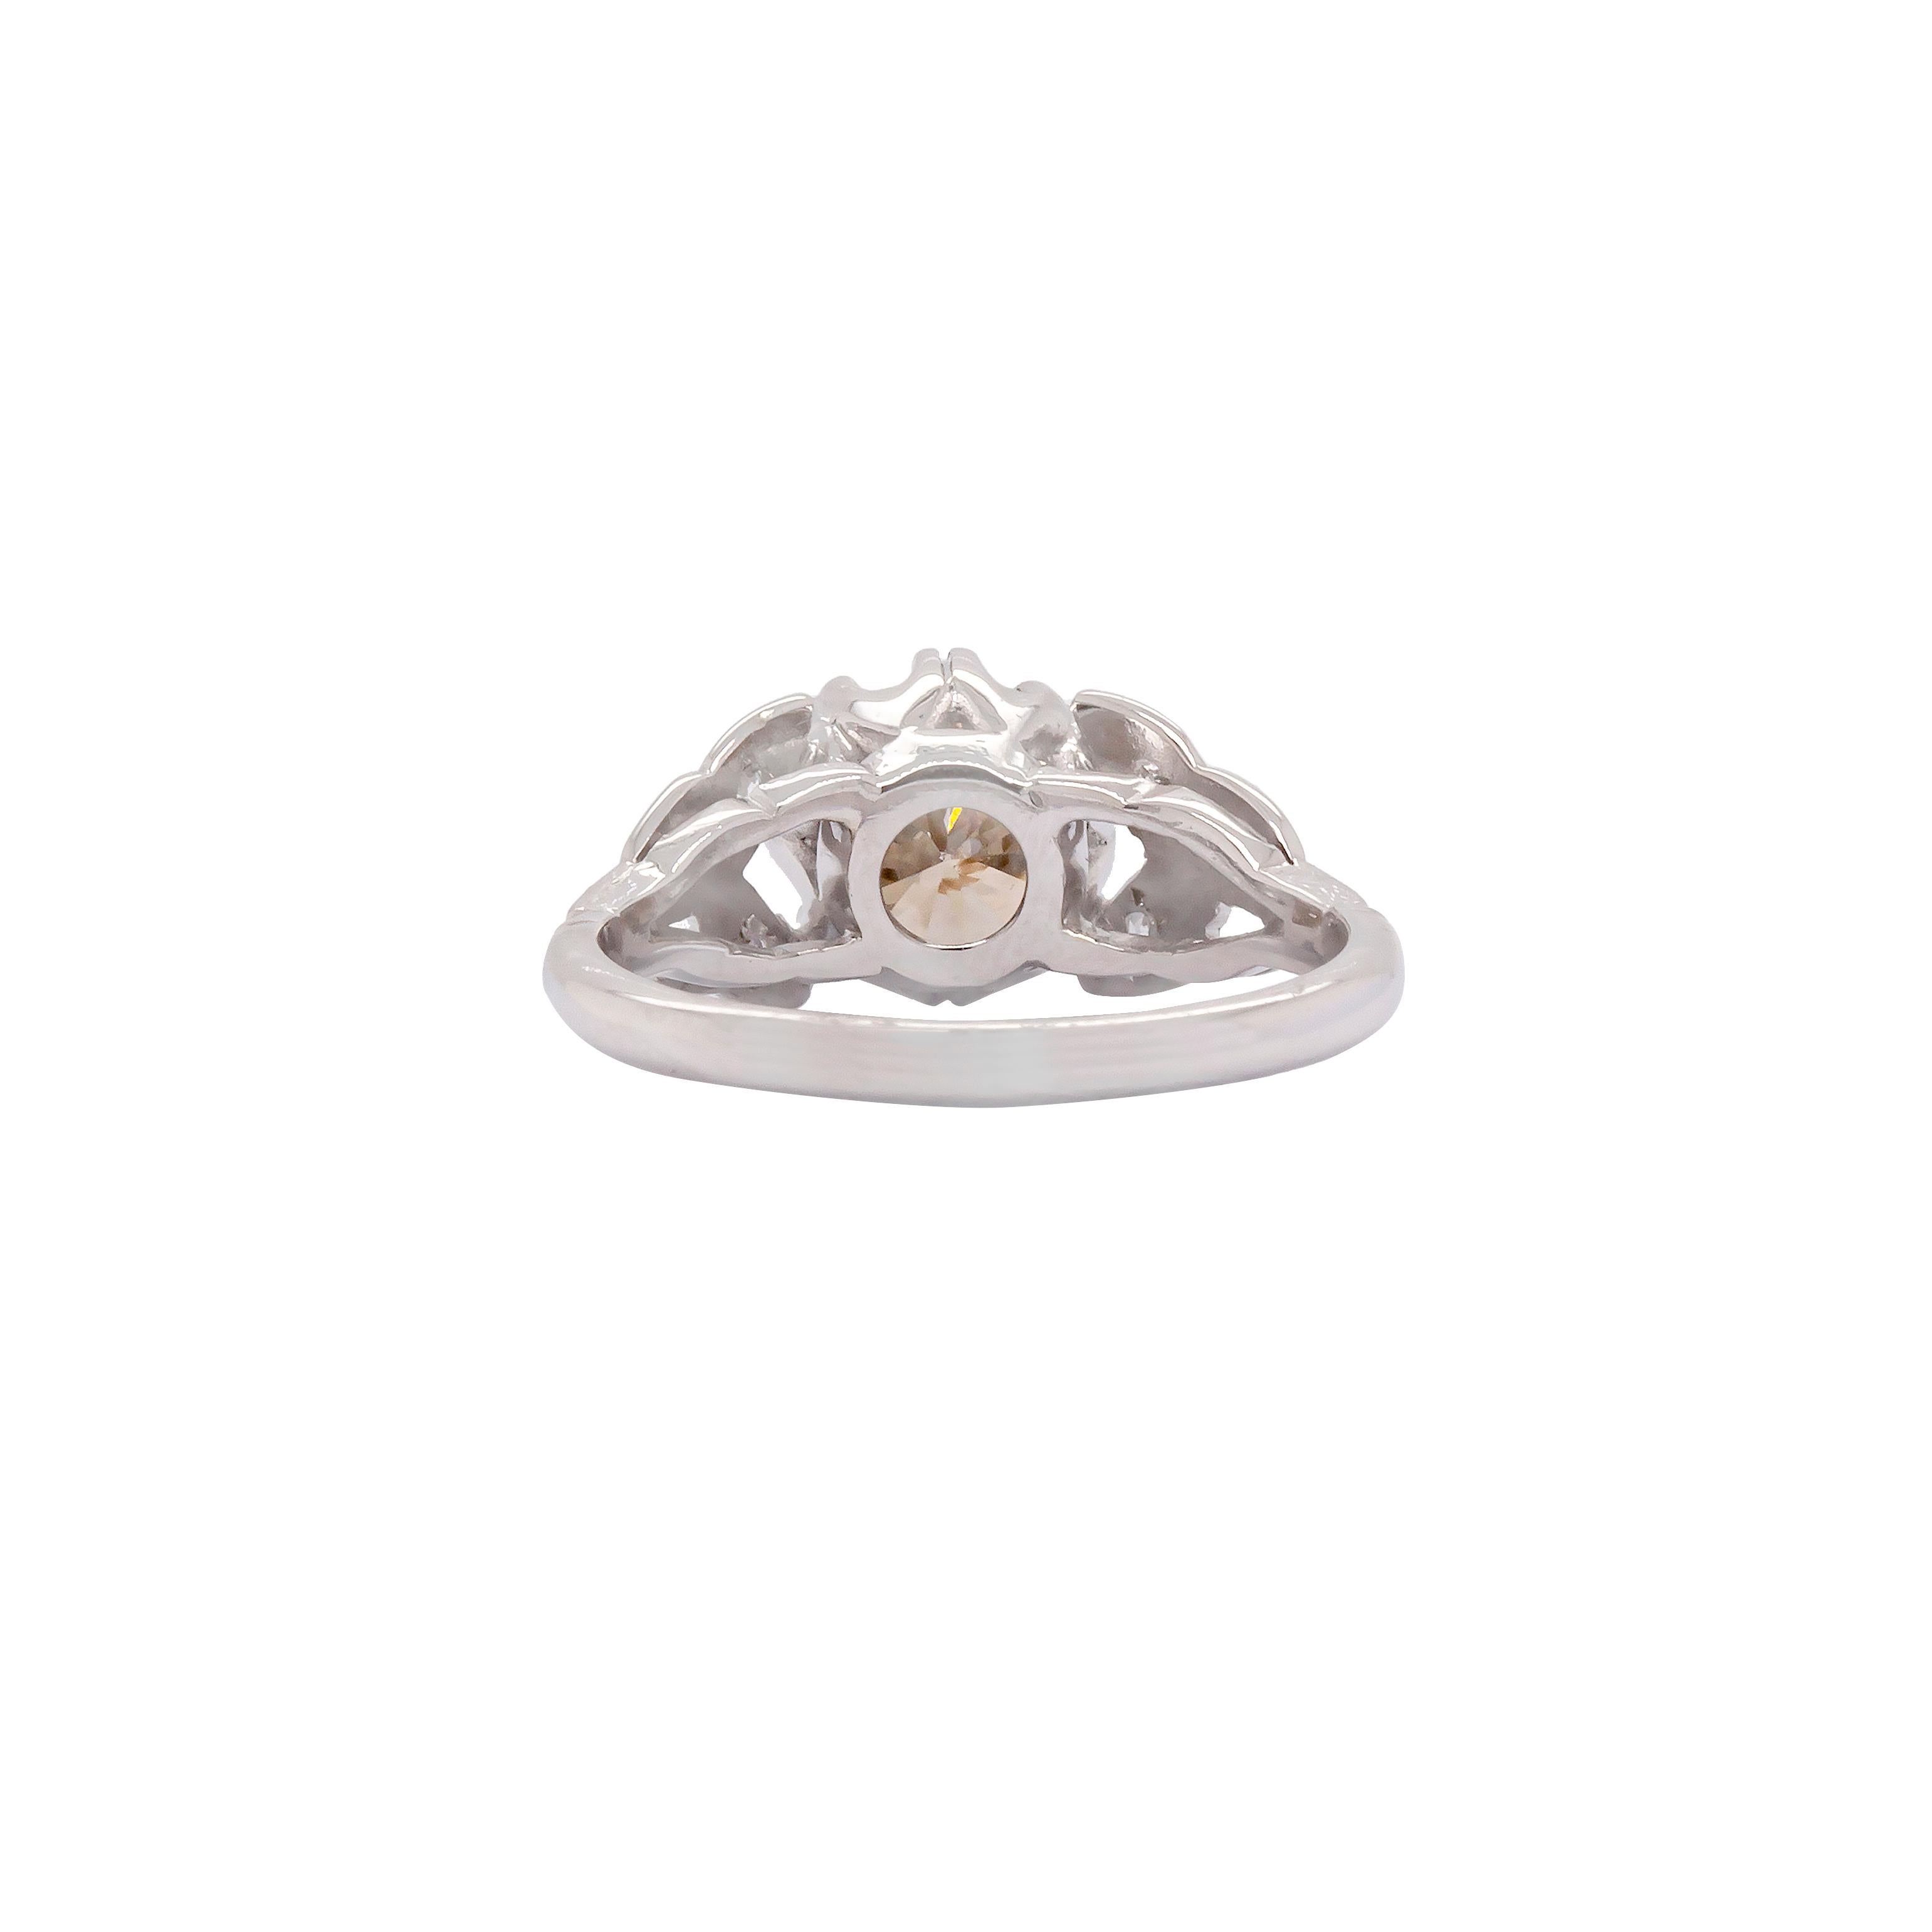 This vintage 1950's ring is the ideal engagement ring for women that would love to wear a piece of history as proof of their commitment and love.

Taking centerstage is a breathtaking 1.18ct fancy brown old cut diamond, making this piece an absolute